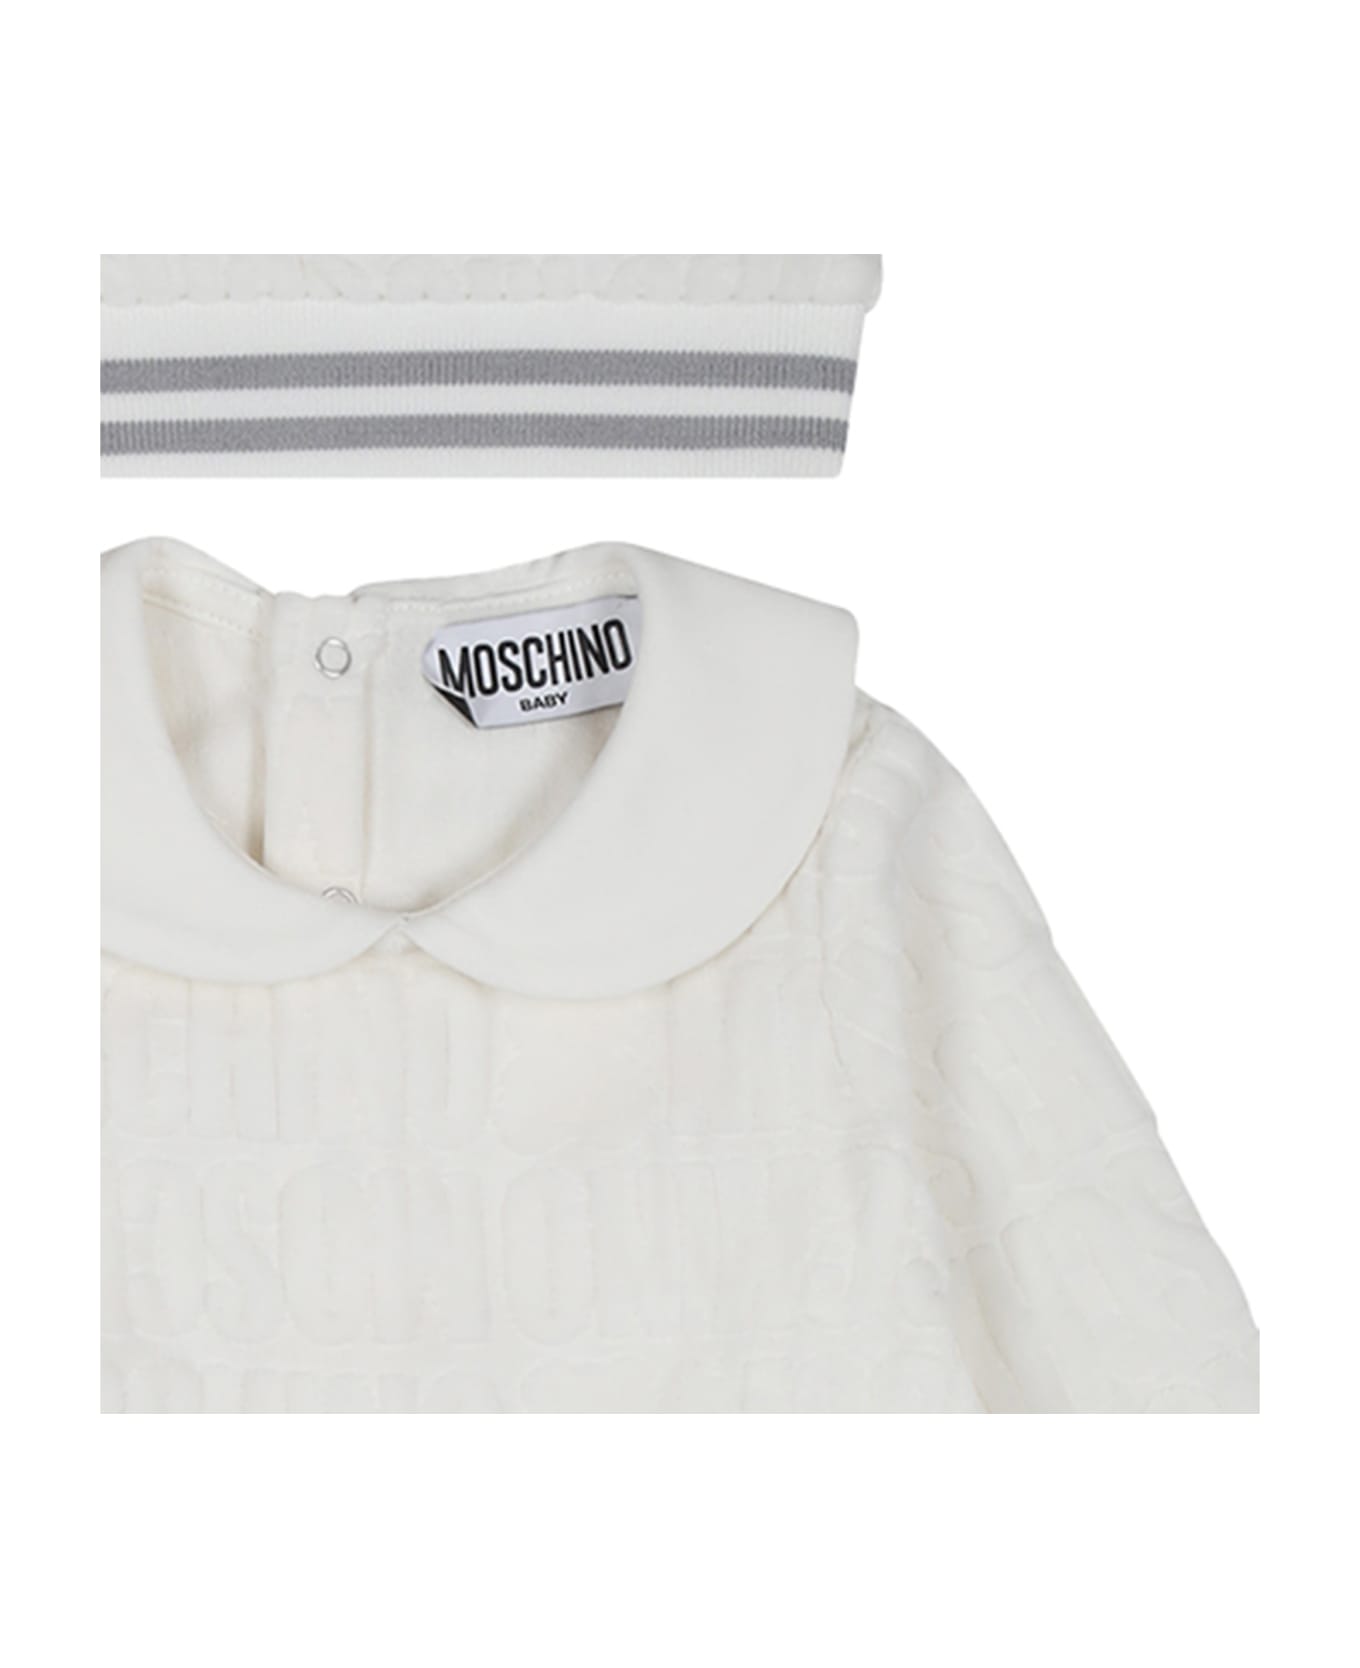 Moschino White Suit For Babykids With Teddy Bear - White